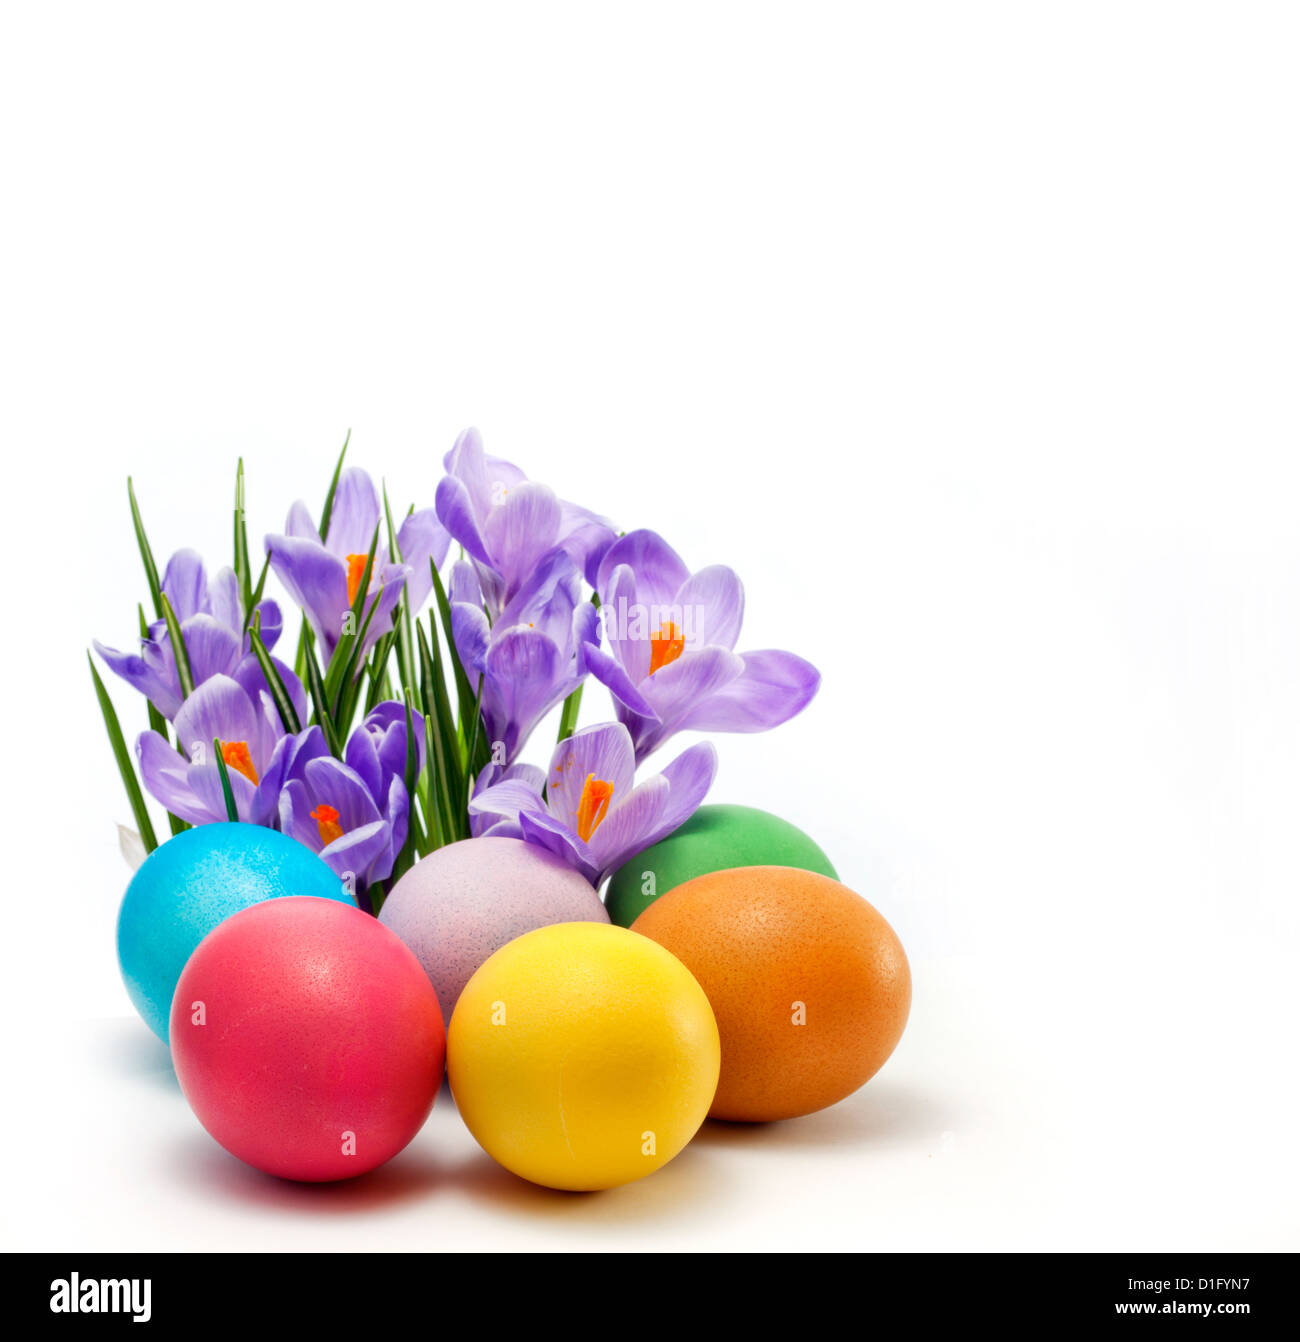 Concept of easter eggs and spring crocus on white background Stock Photo